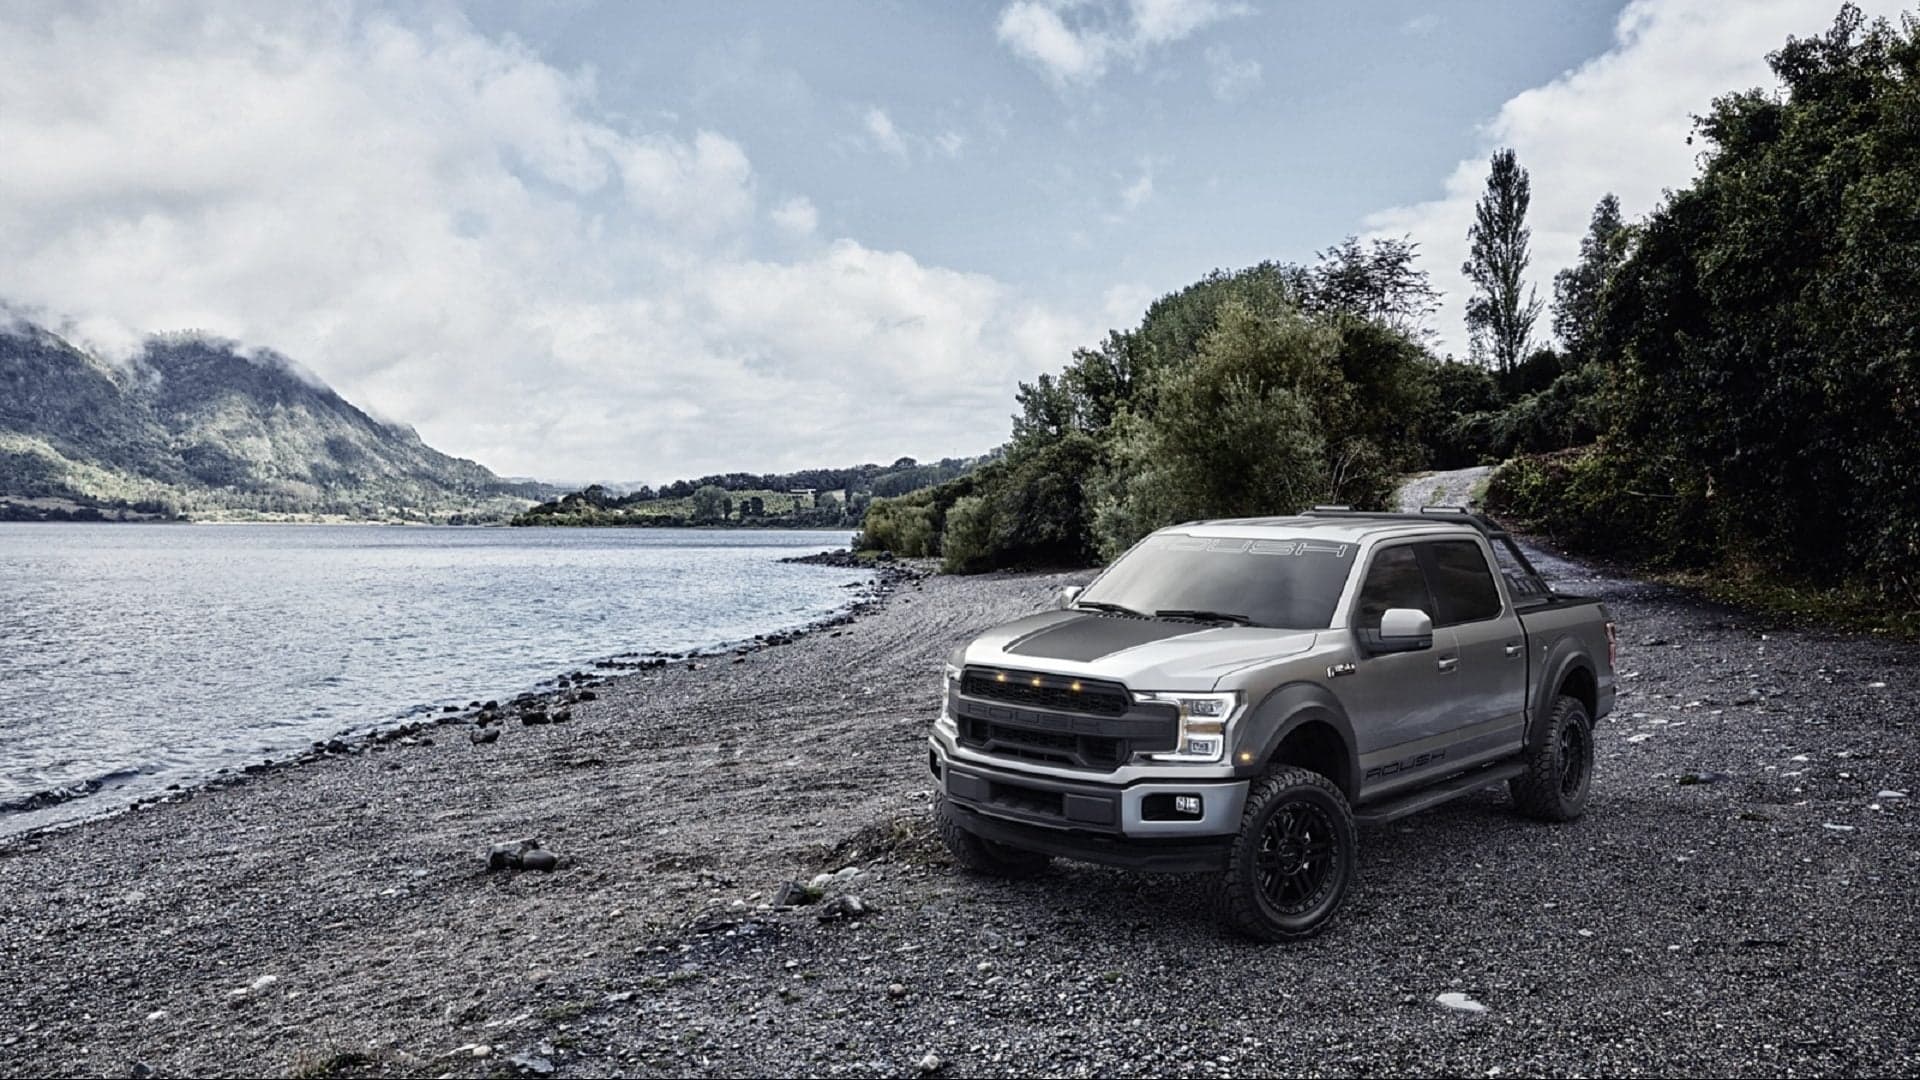 2020 Roush F-150 Is a Luxurious Off-Road Kit for $13,750